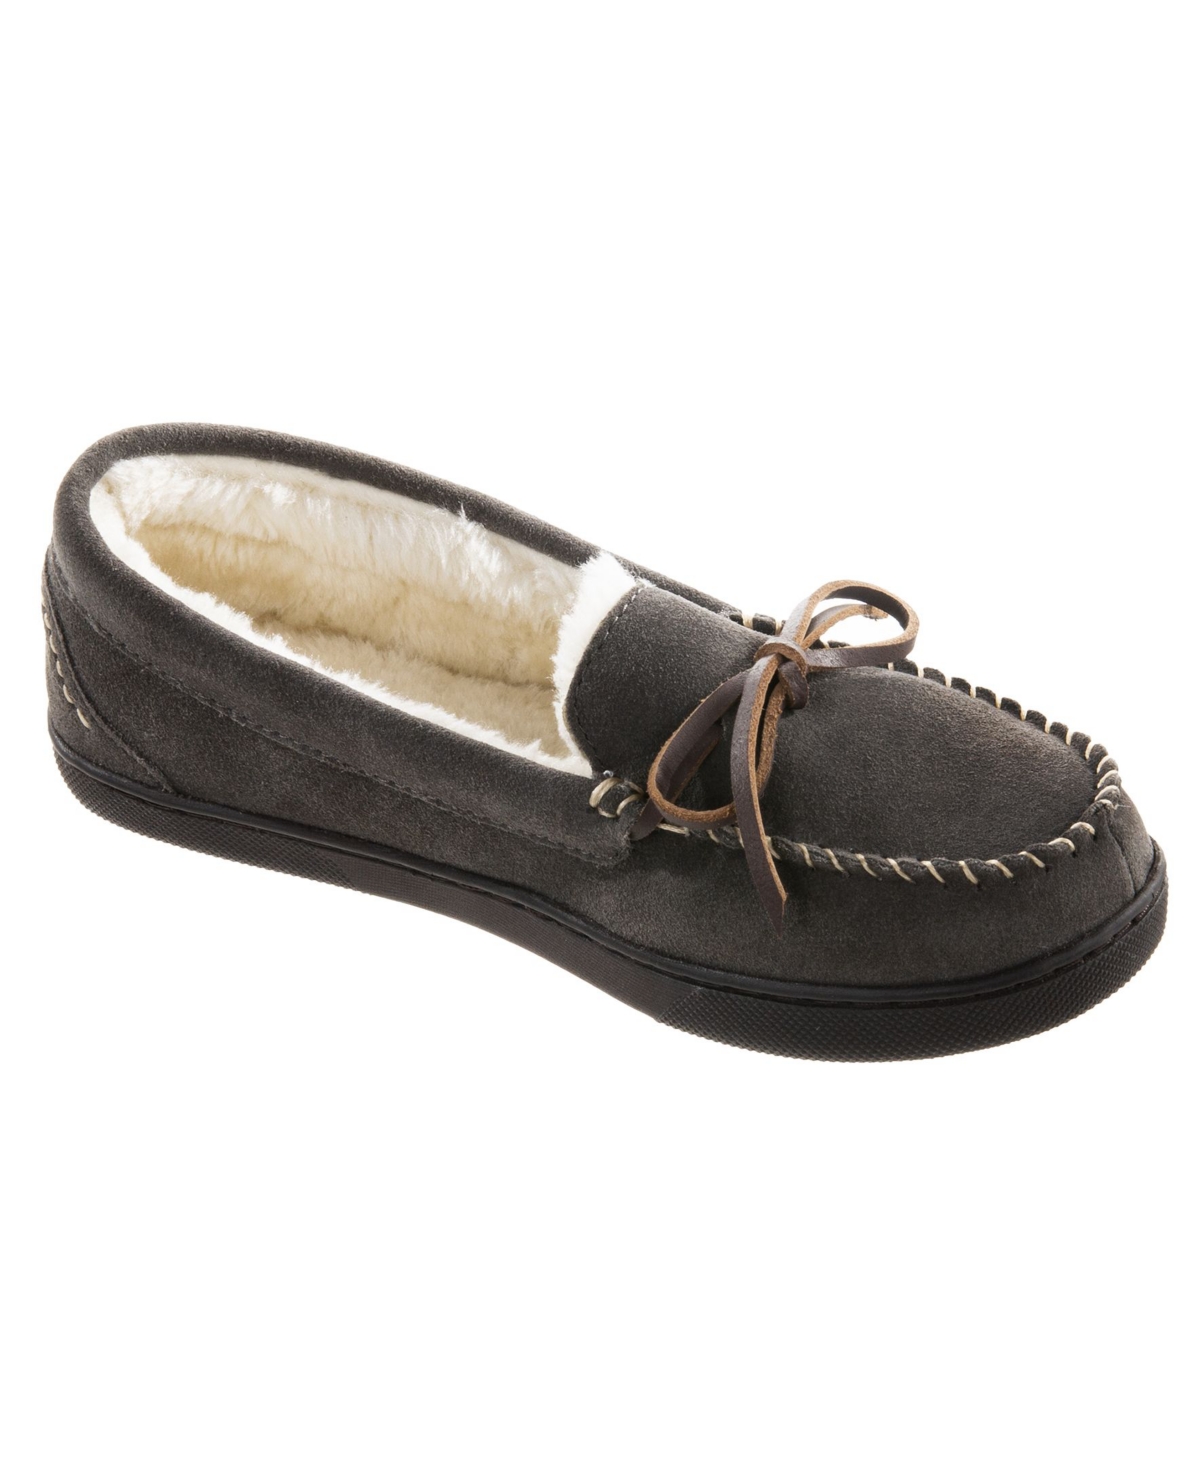 Women's Sage Genuine Suede Moccasin Slippers - Ash